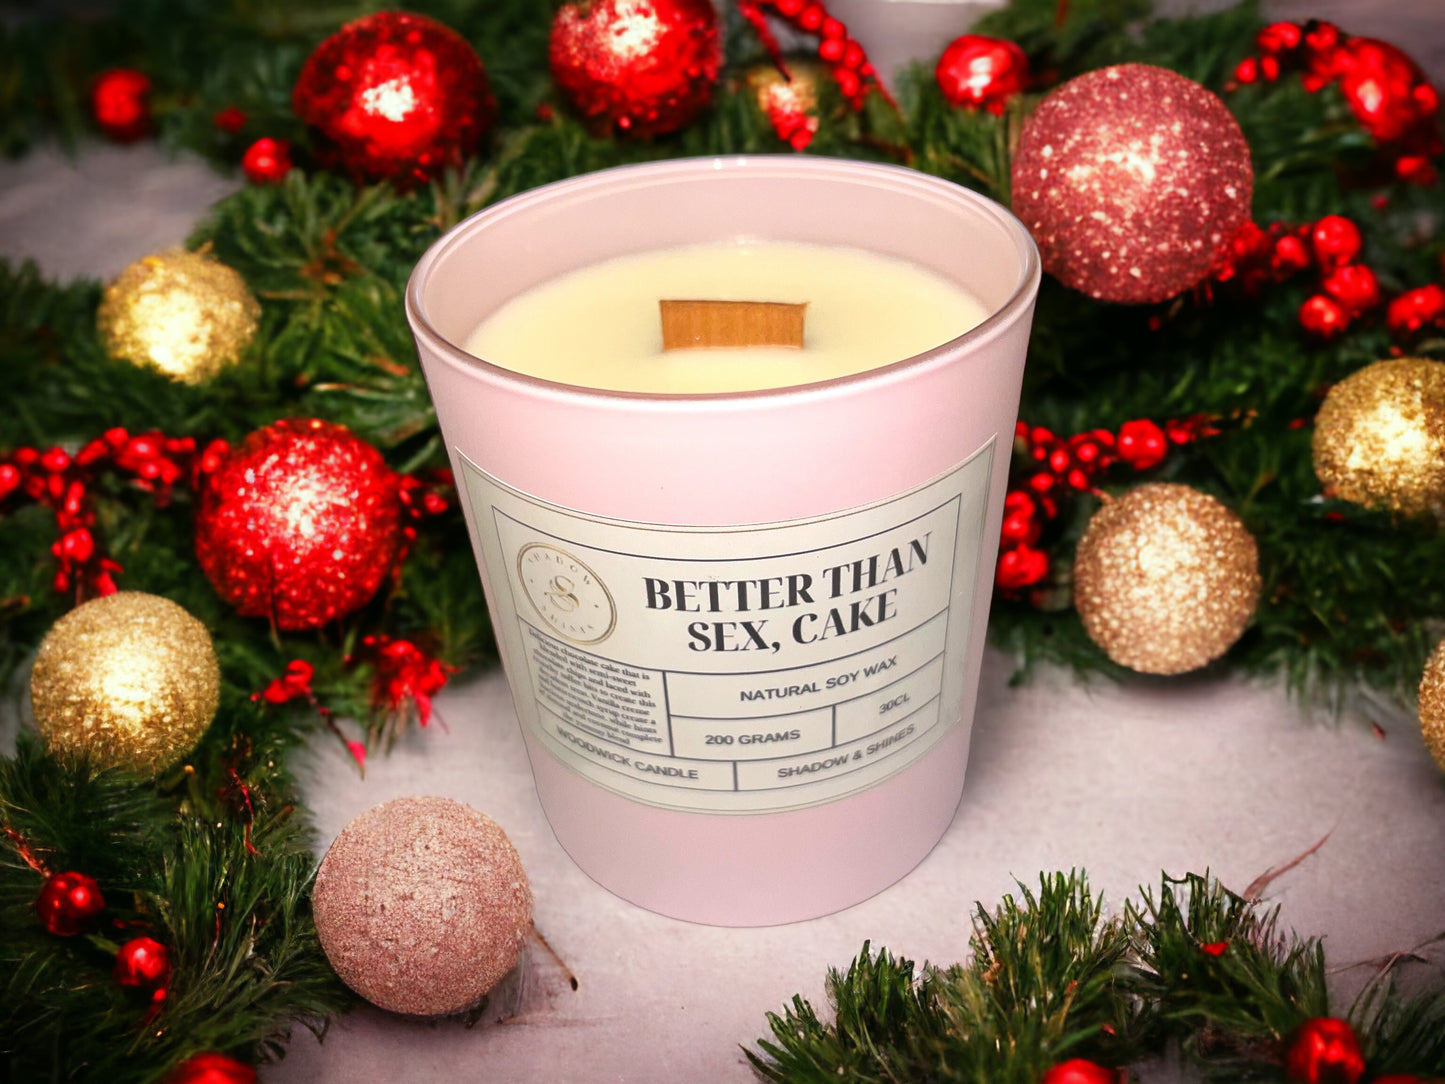 Better Than Sex, Cake! Scented Wood Wick Candle